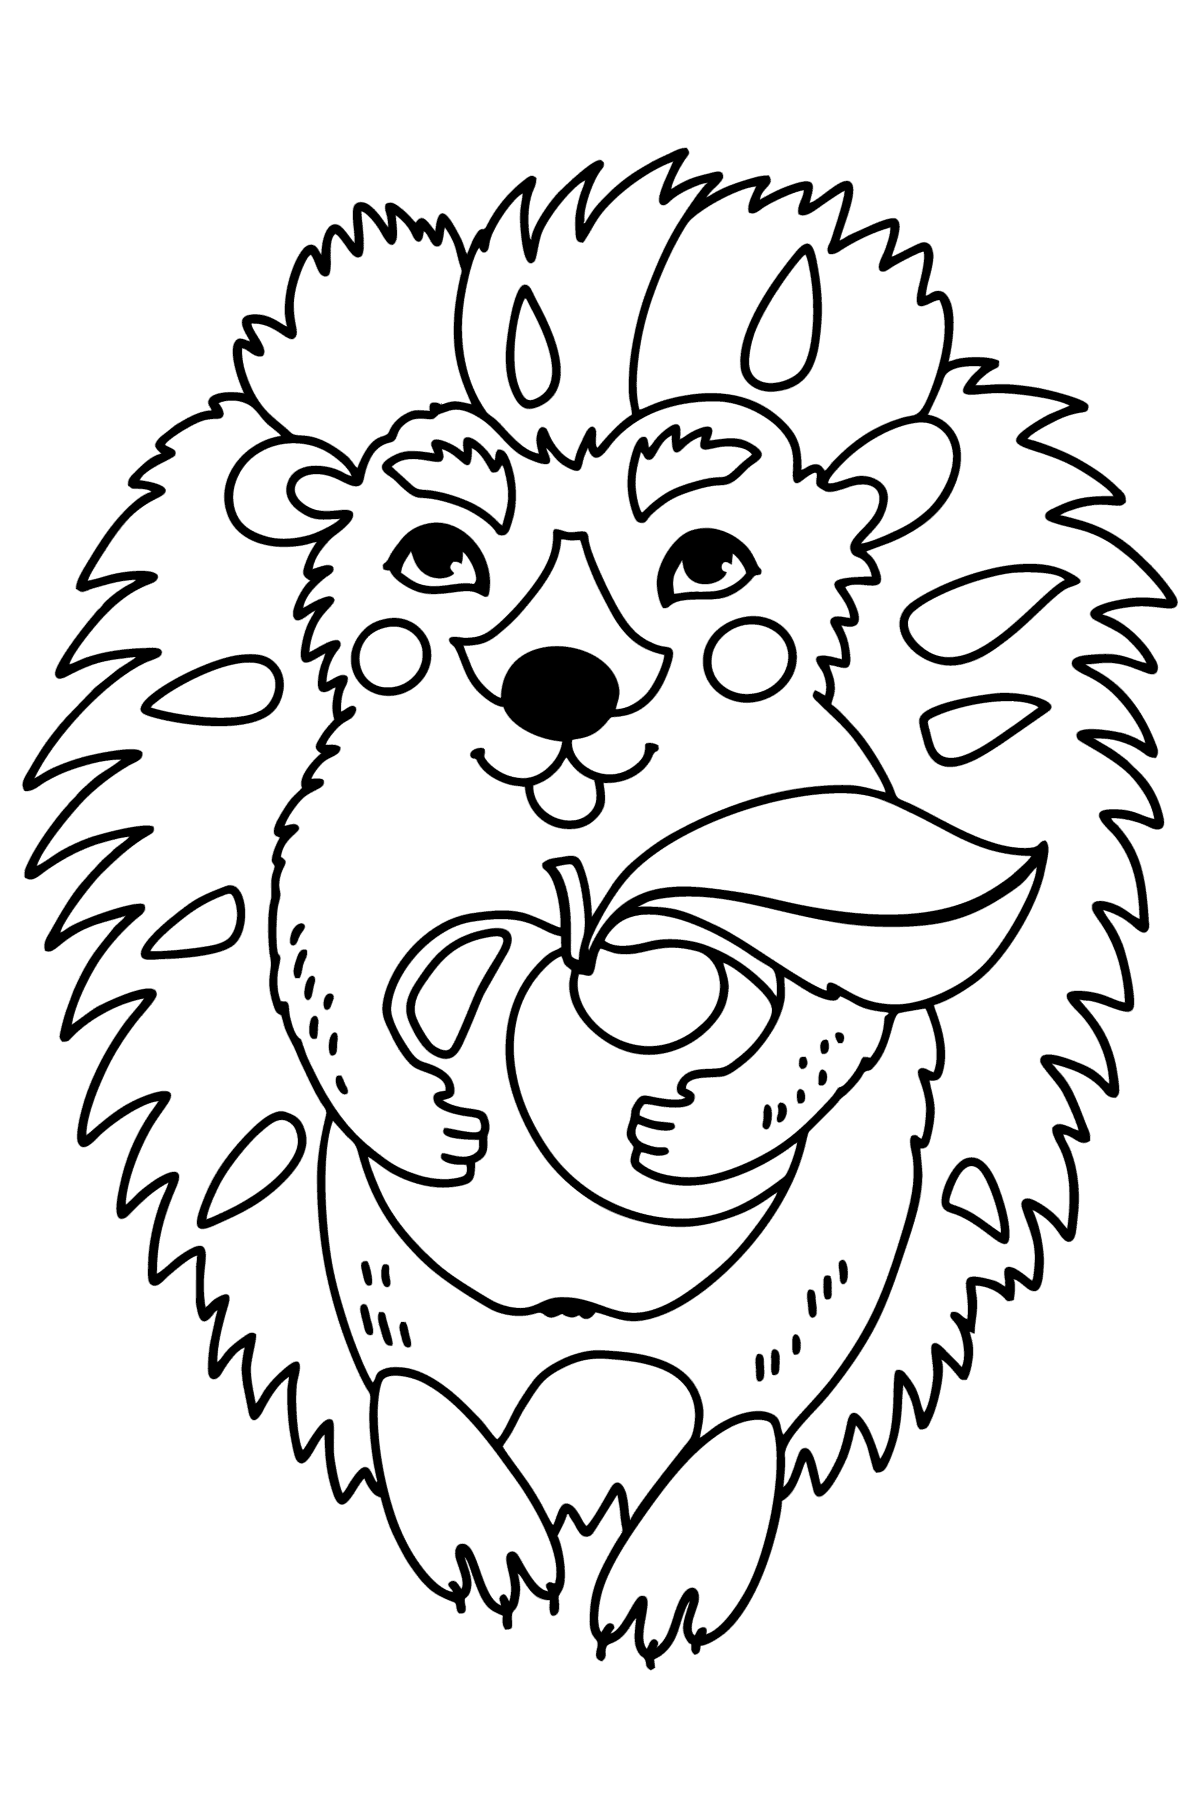 Hedgehog with an apple сoloring page - Coloring Pages for Kids